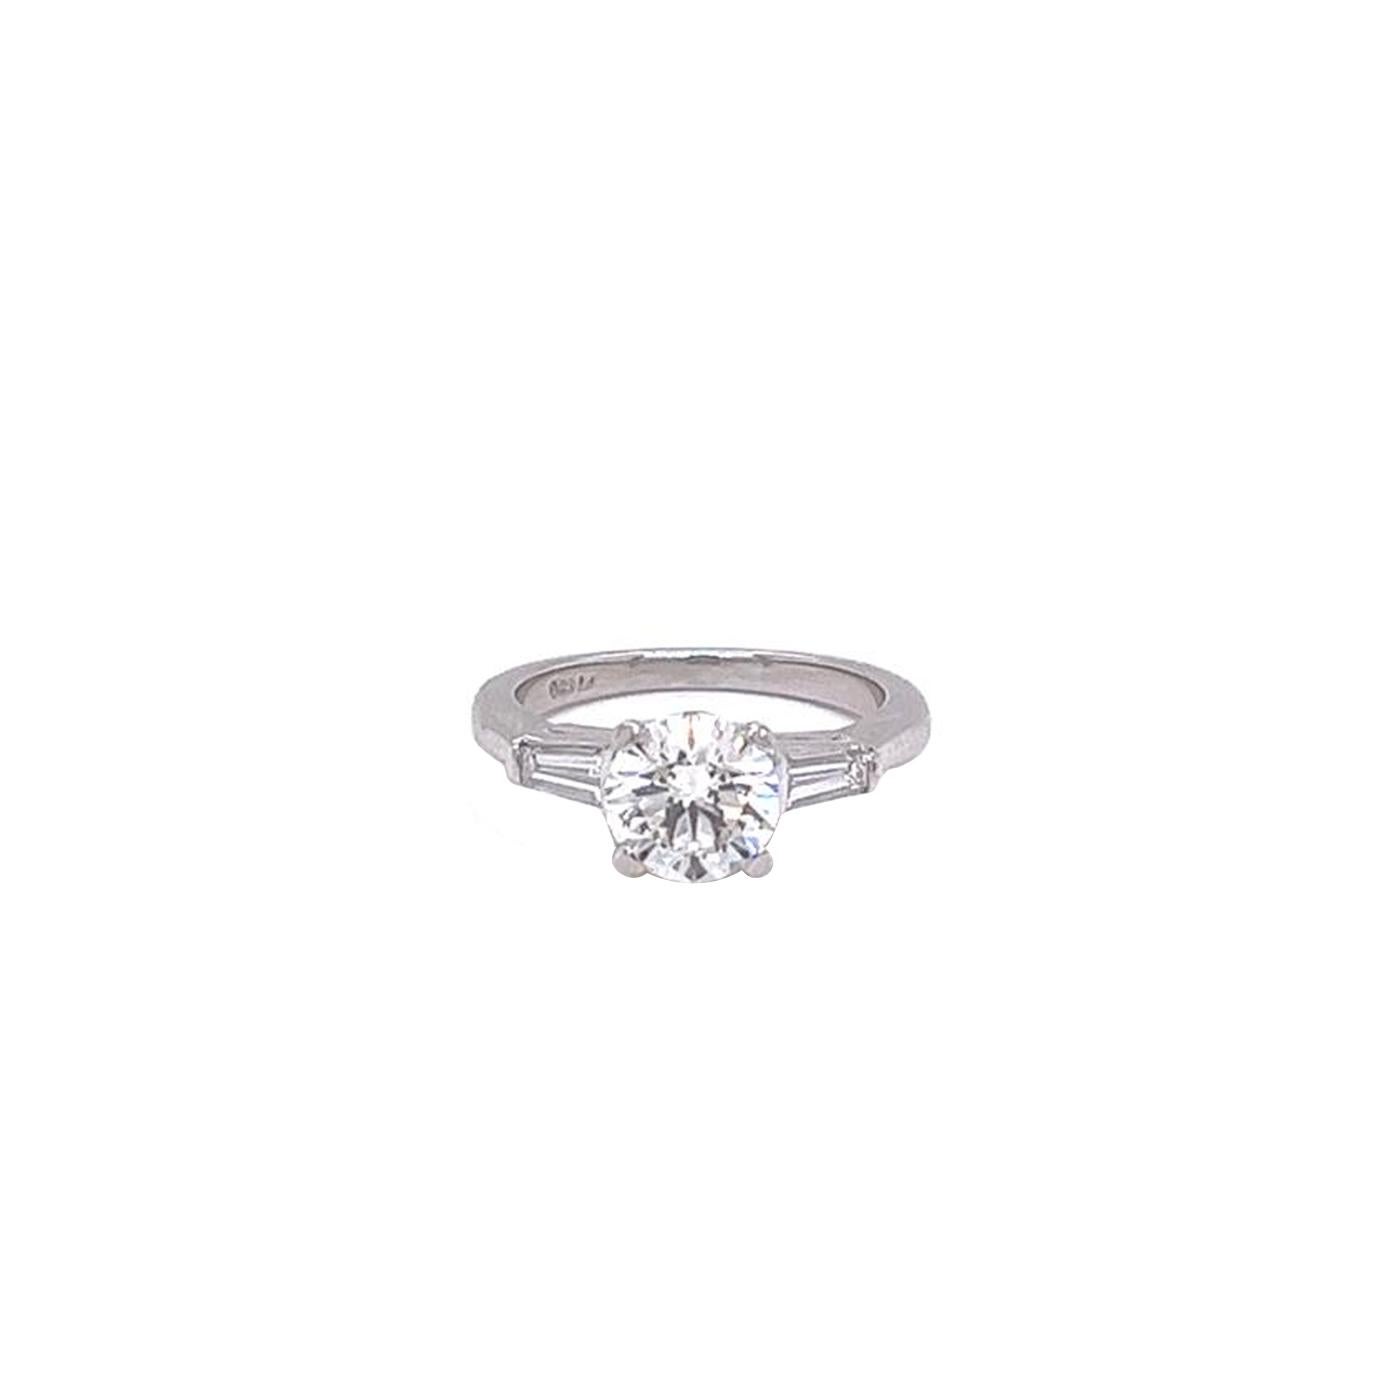 Modernist 1.05ct Natural Round Diamond Platinum Ring With 0.40ct Pave Baguette Diamonds For Sale